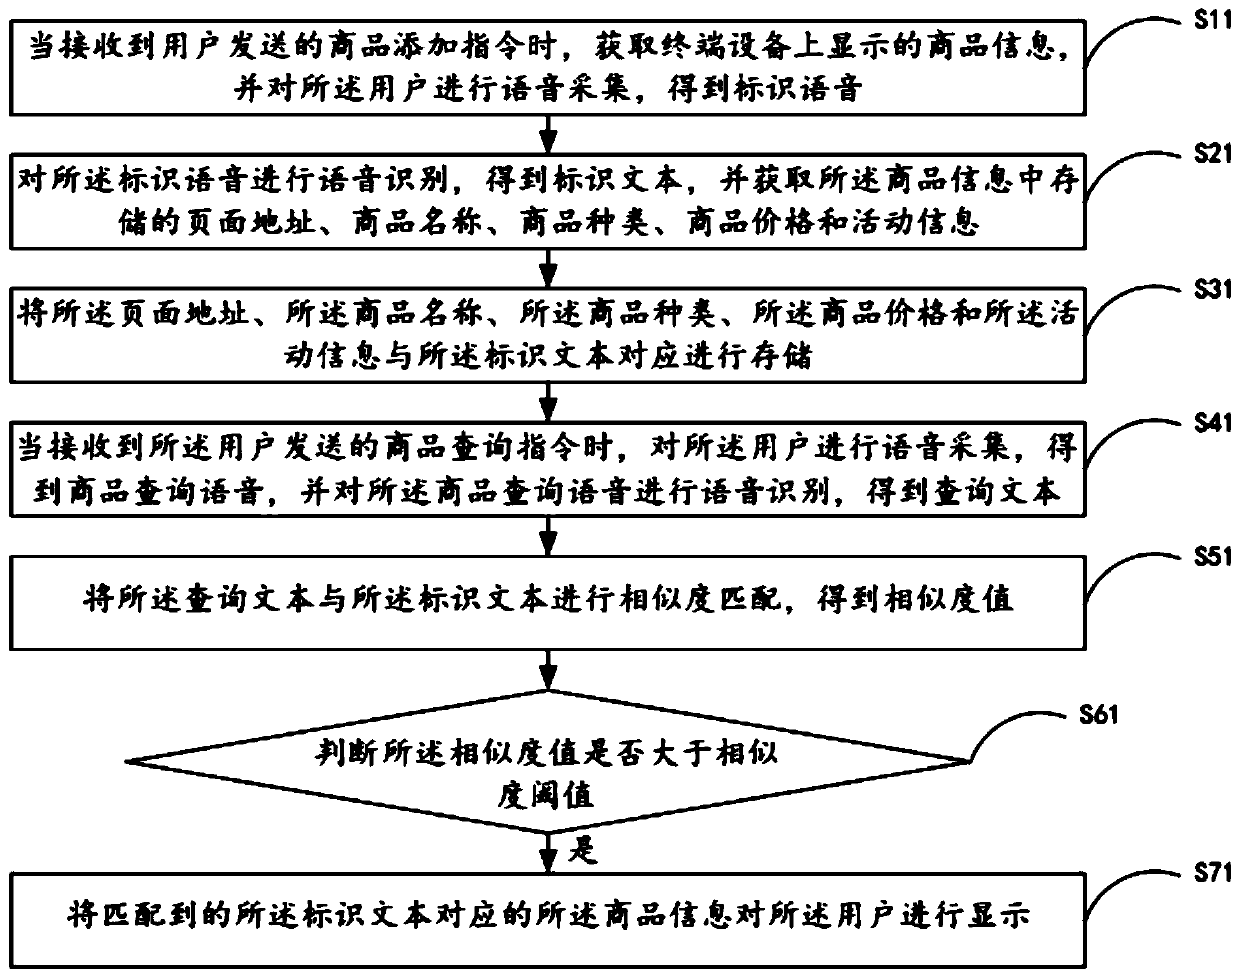 Shopping cart management method and system based on voice recognition and mobile terminal